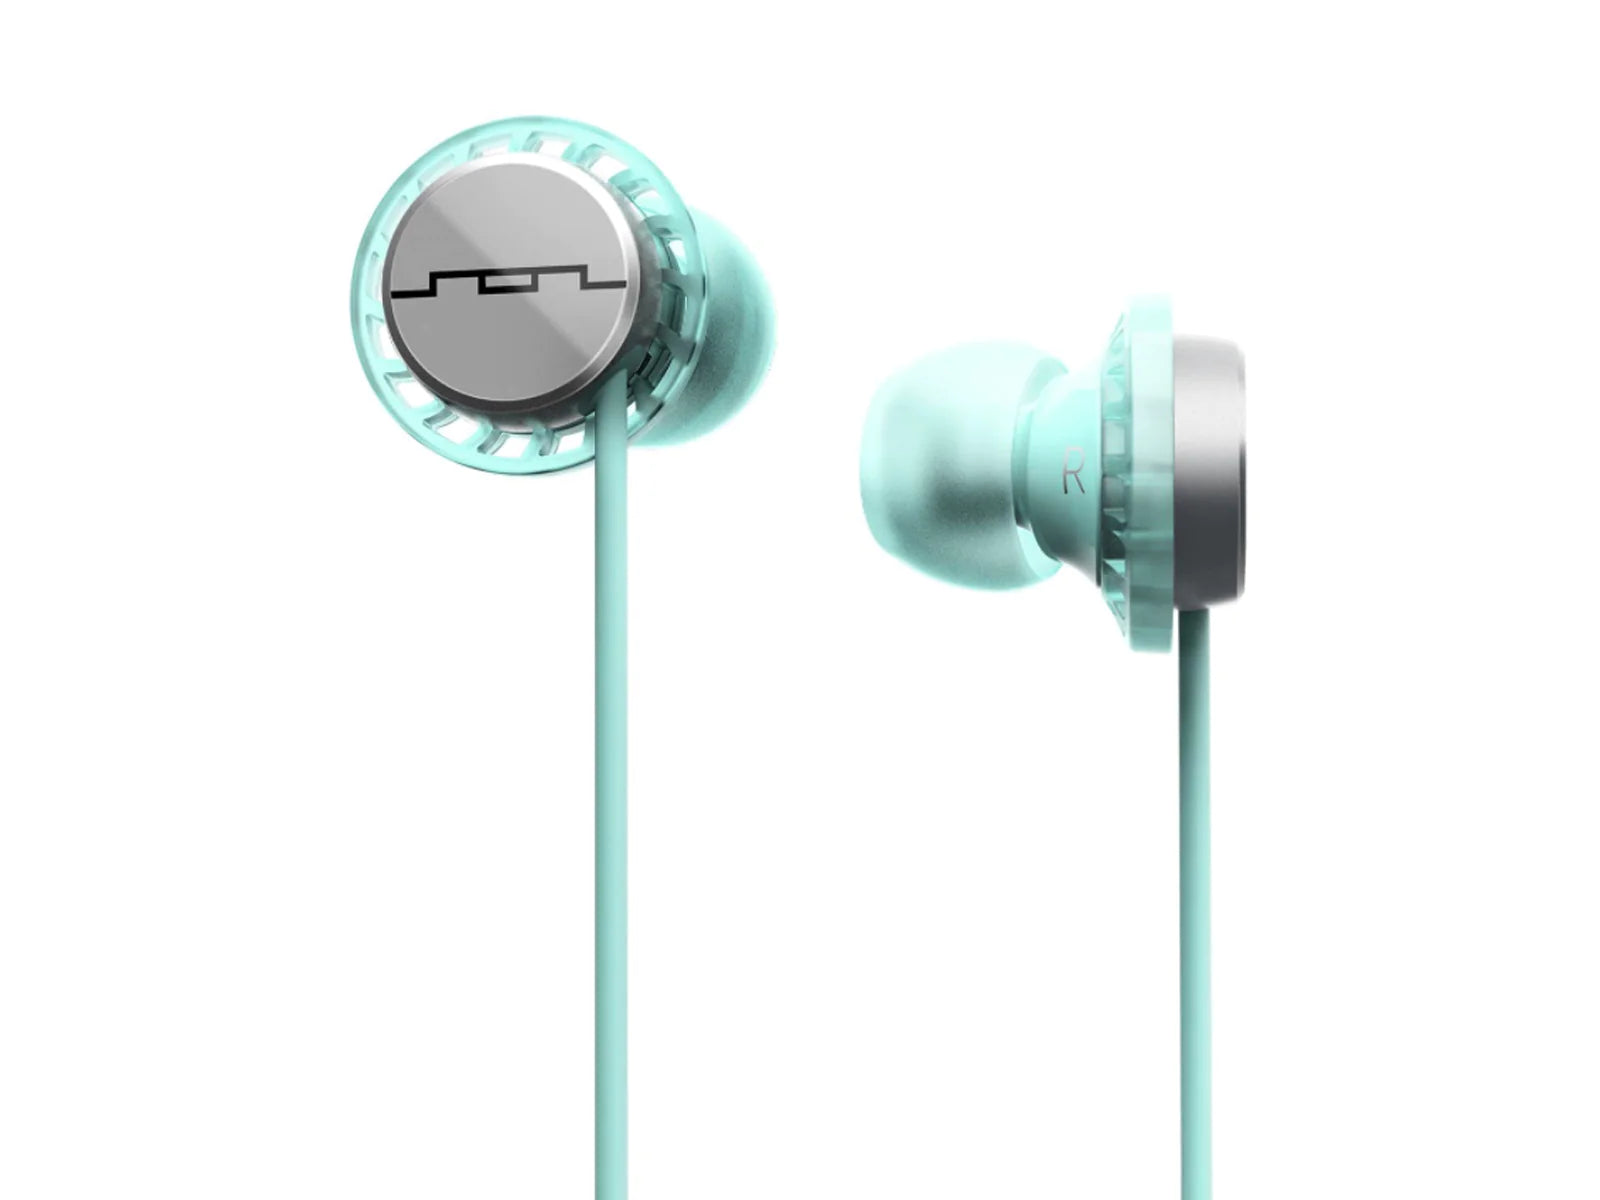 Turquoise SOL Republic Relays Sport Wireless In-Ear Noise Isolating Headphones Close Up